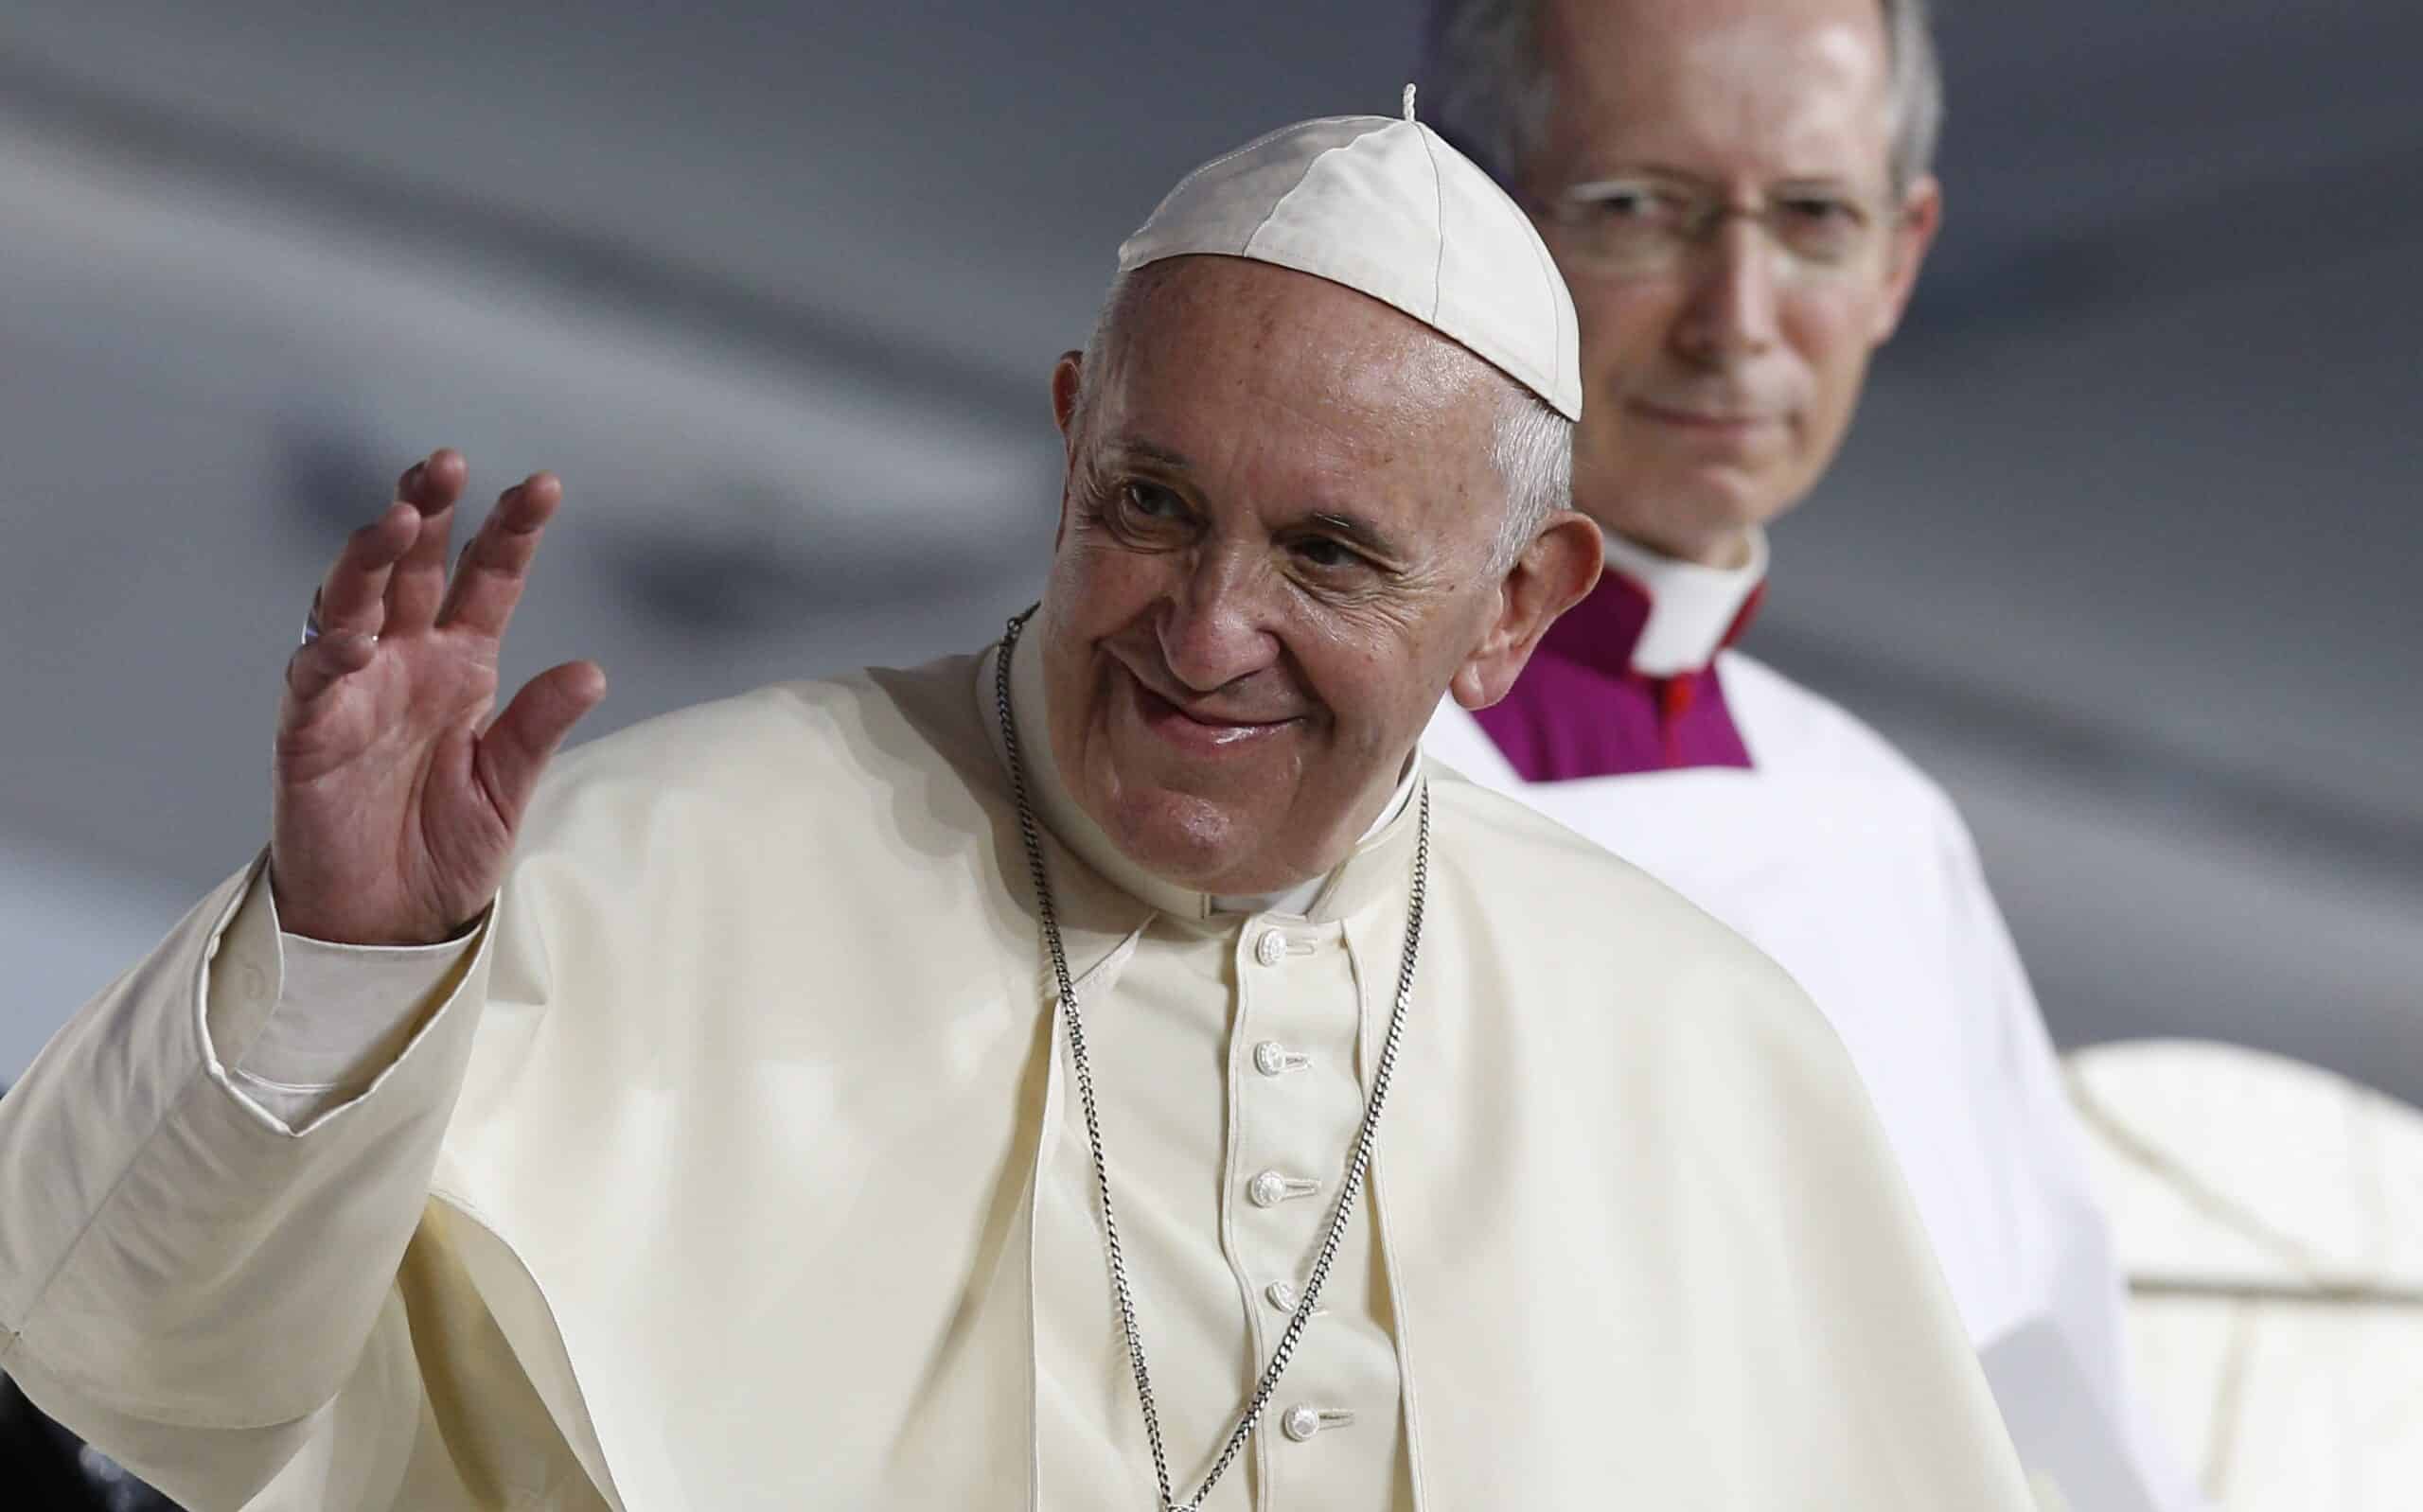 Pope Francis waves as he arrives to lead the World Youth Day prayer vigil at St. John Paul II Field in Panama City Jan. 26, 2019. (CNS photo/Paul Haring) See POPE-PANAMA-WYD-VIGIL Jan. 26, 2019.